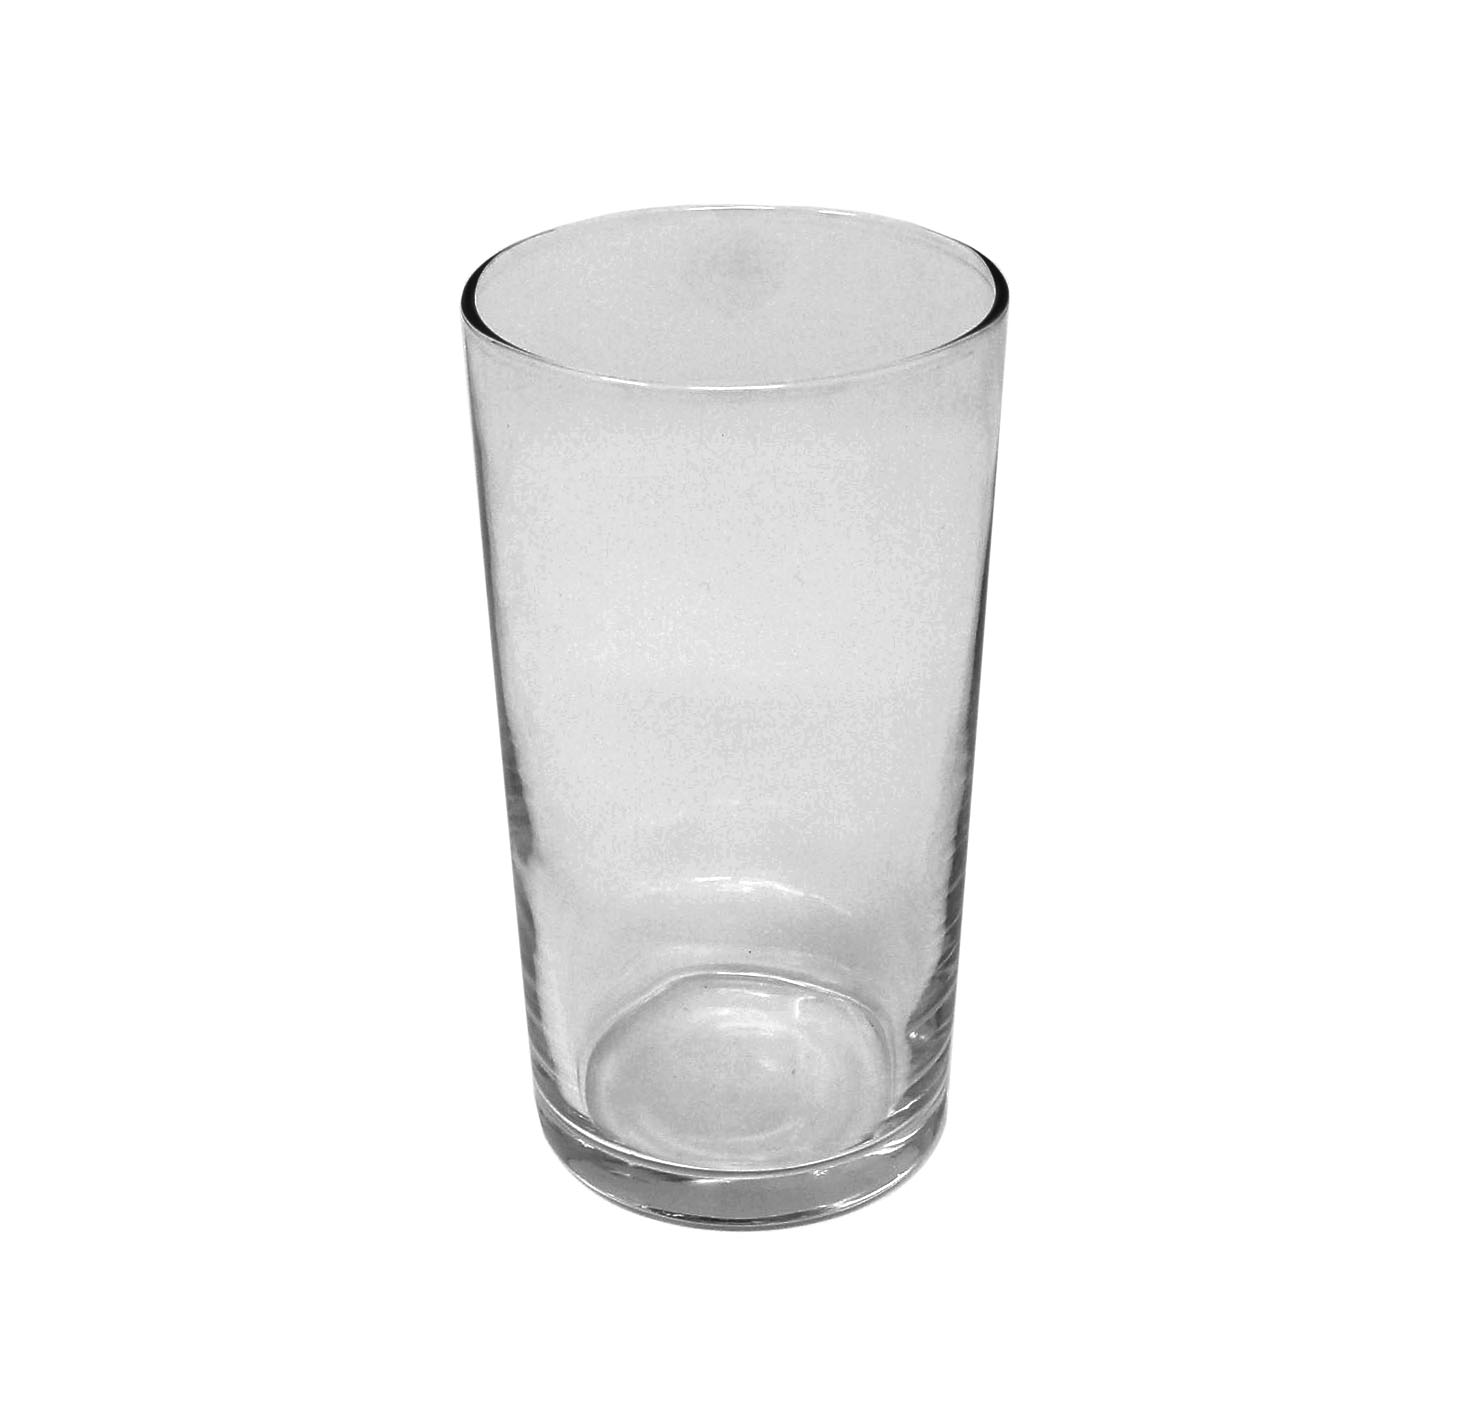 8 oz Hi-Ball Glass - Rent-All Plaza of Kennesaw